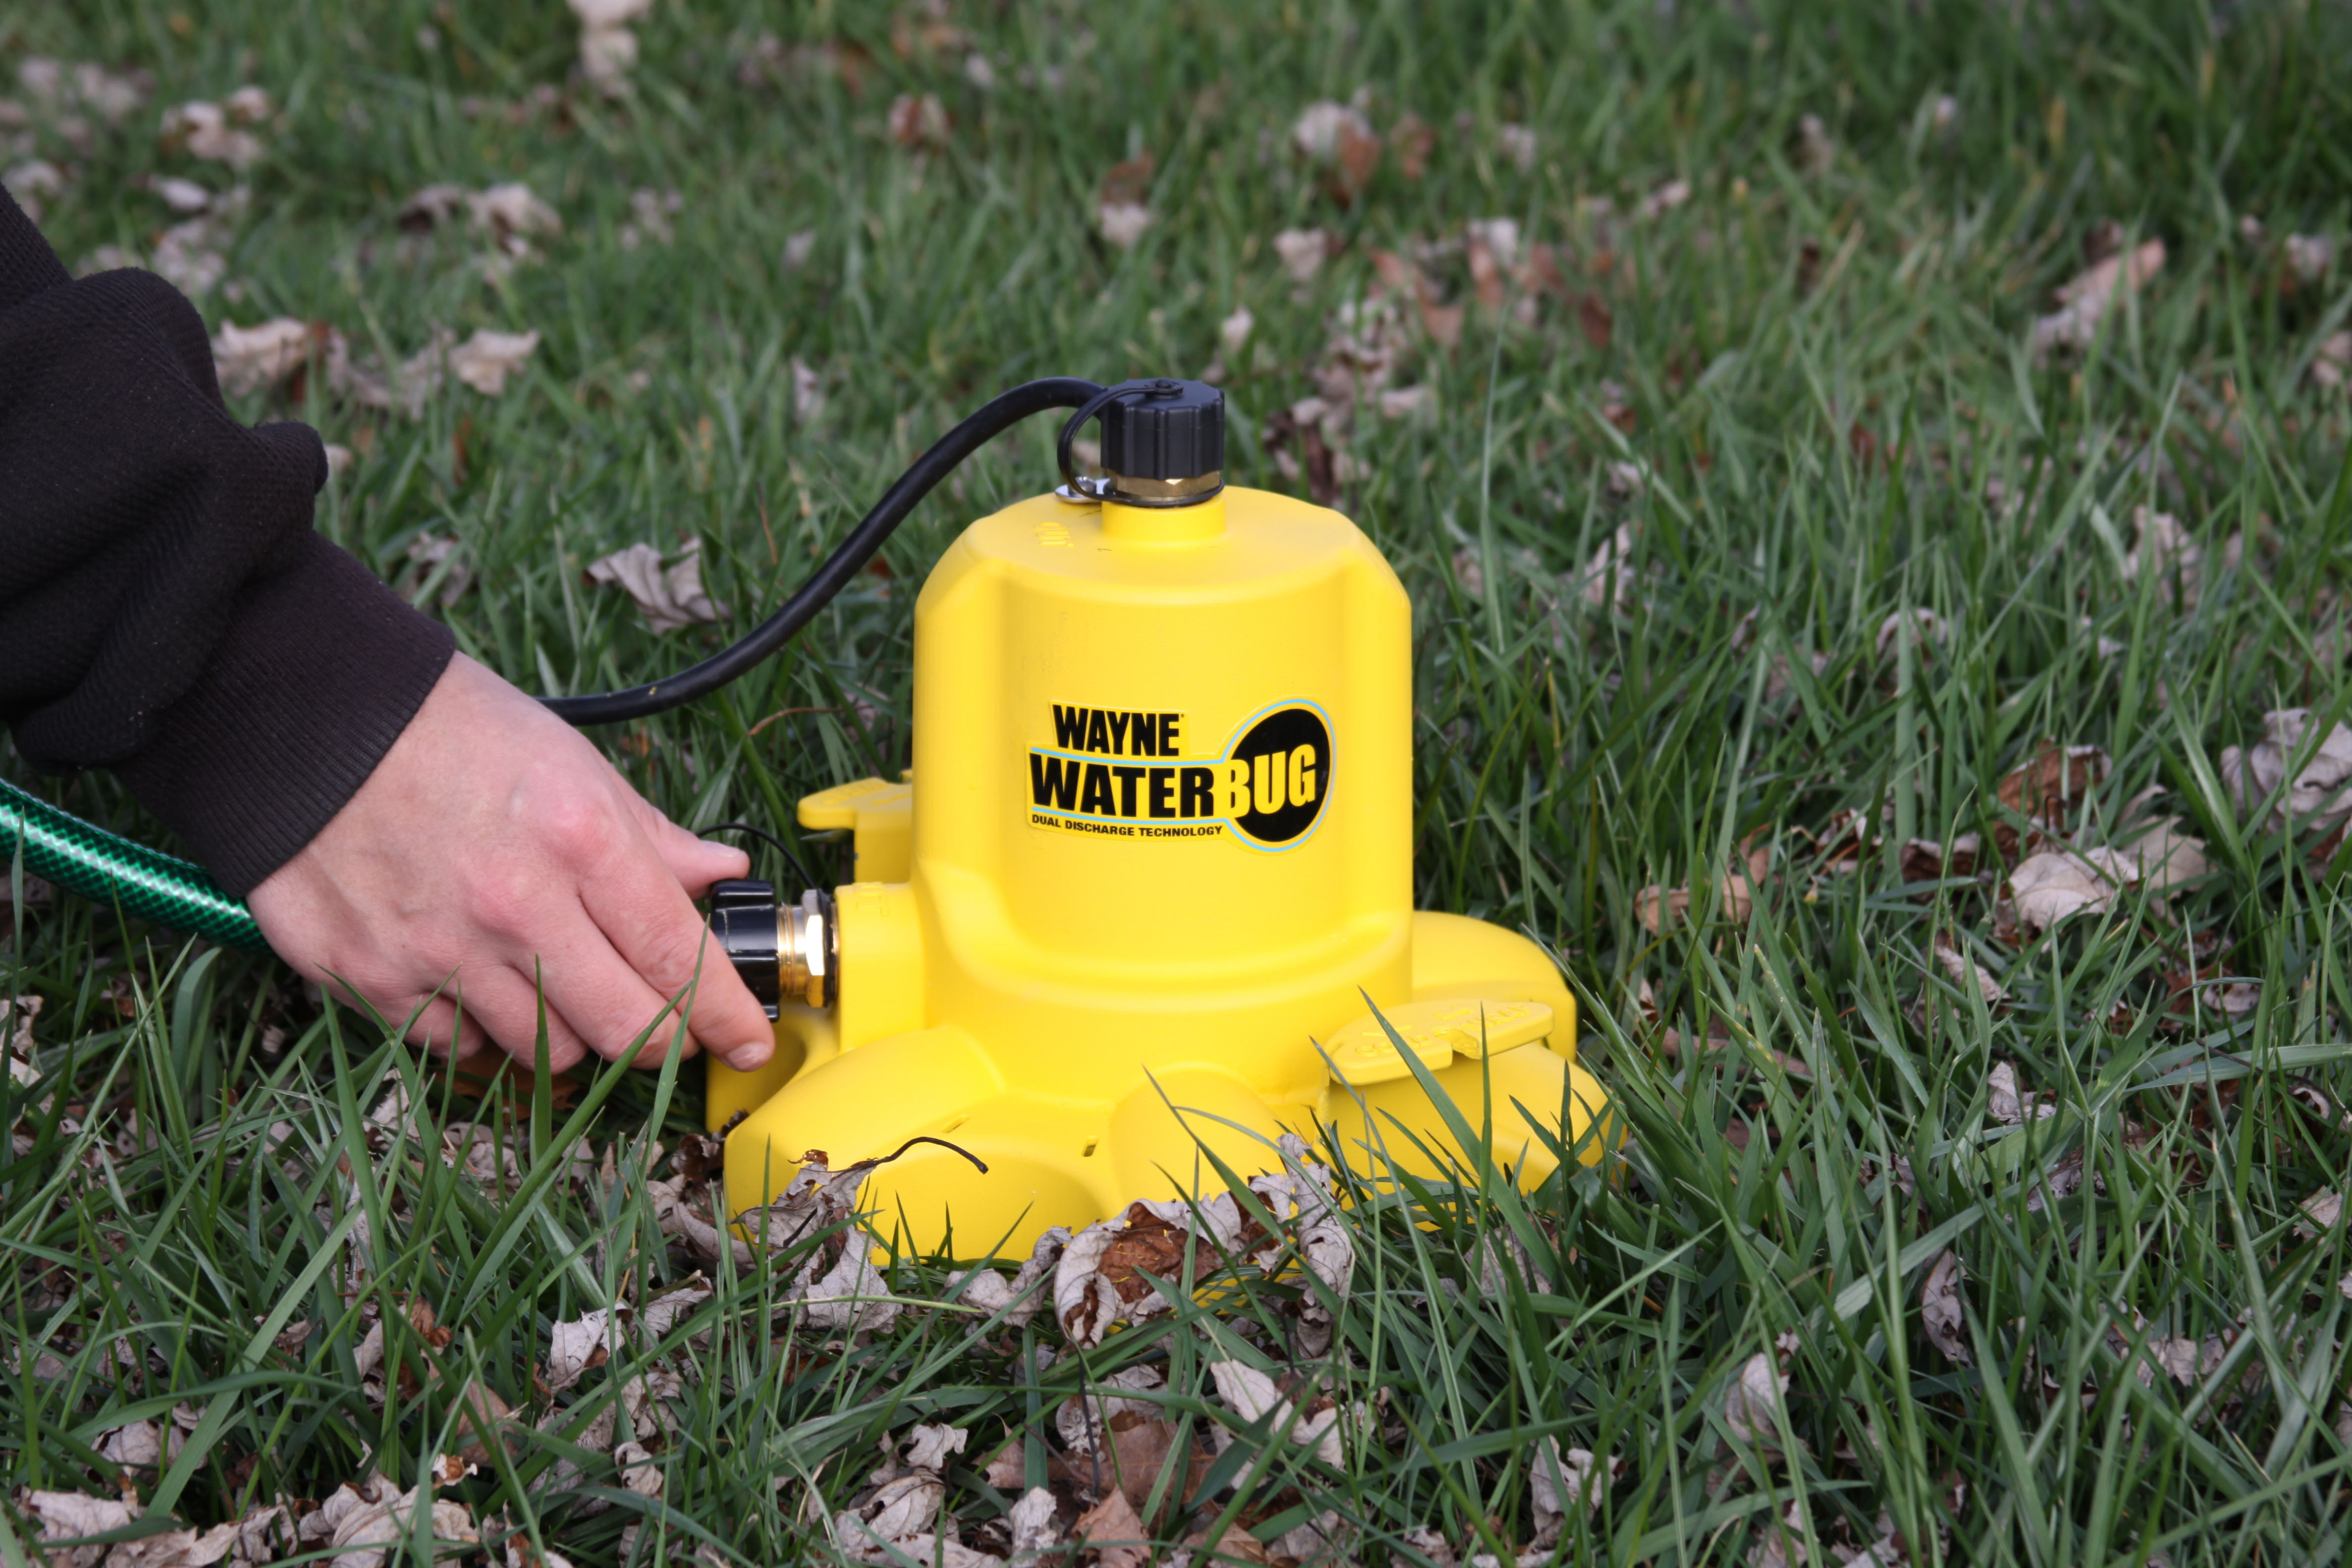 The WAYNE WaterBUG is easy to use and versatile, with a top and side discharge for tight spaces or open areas.